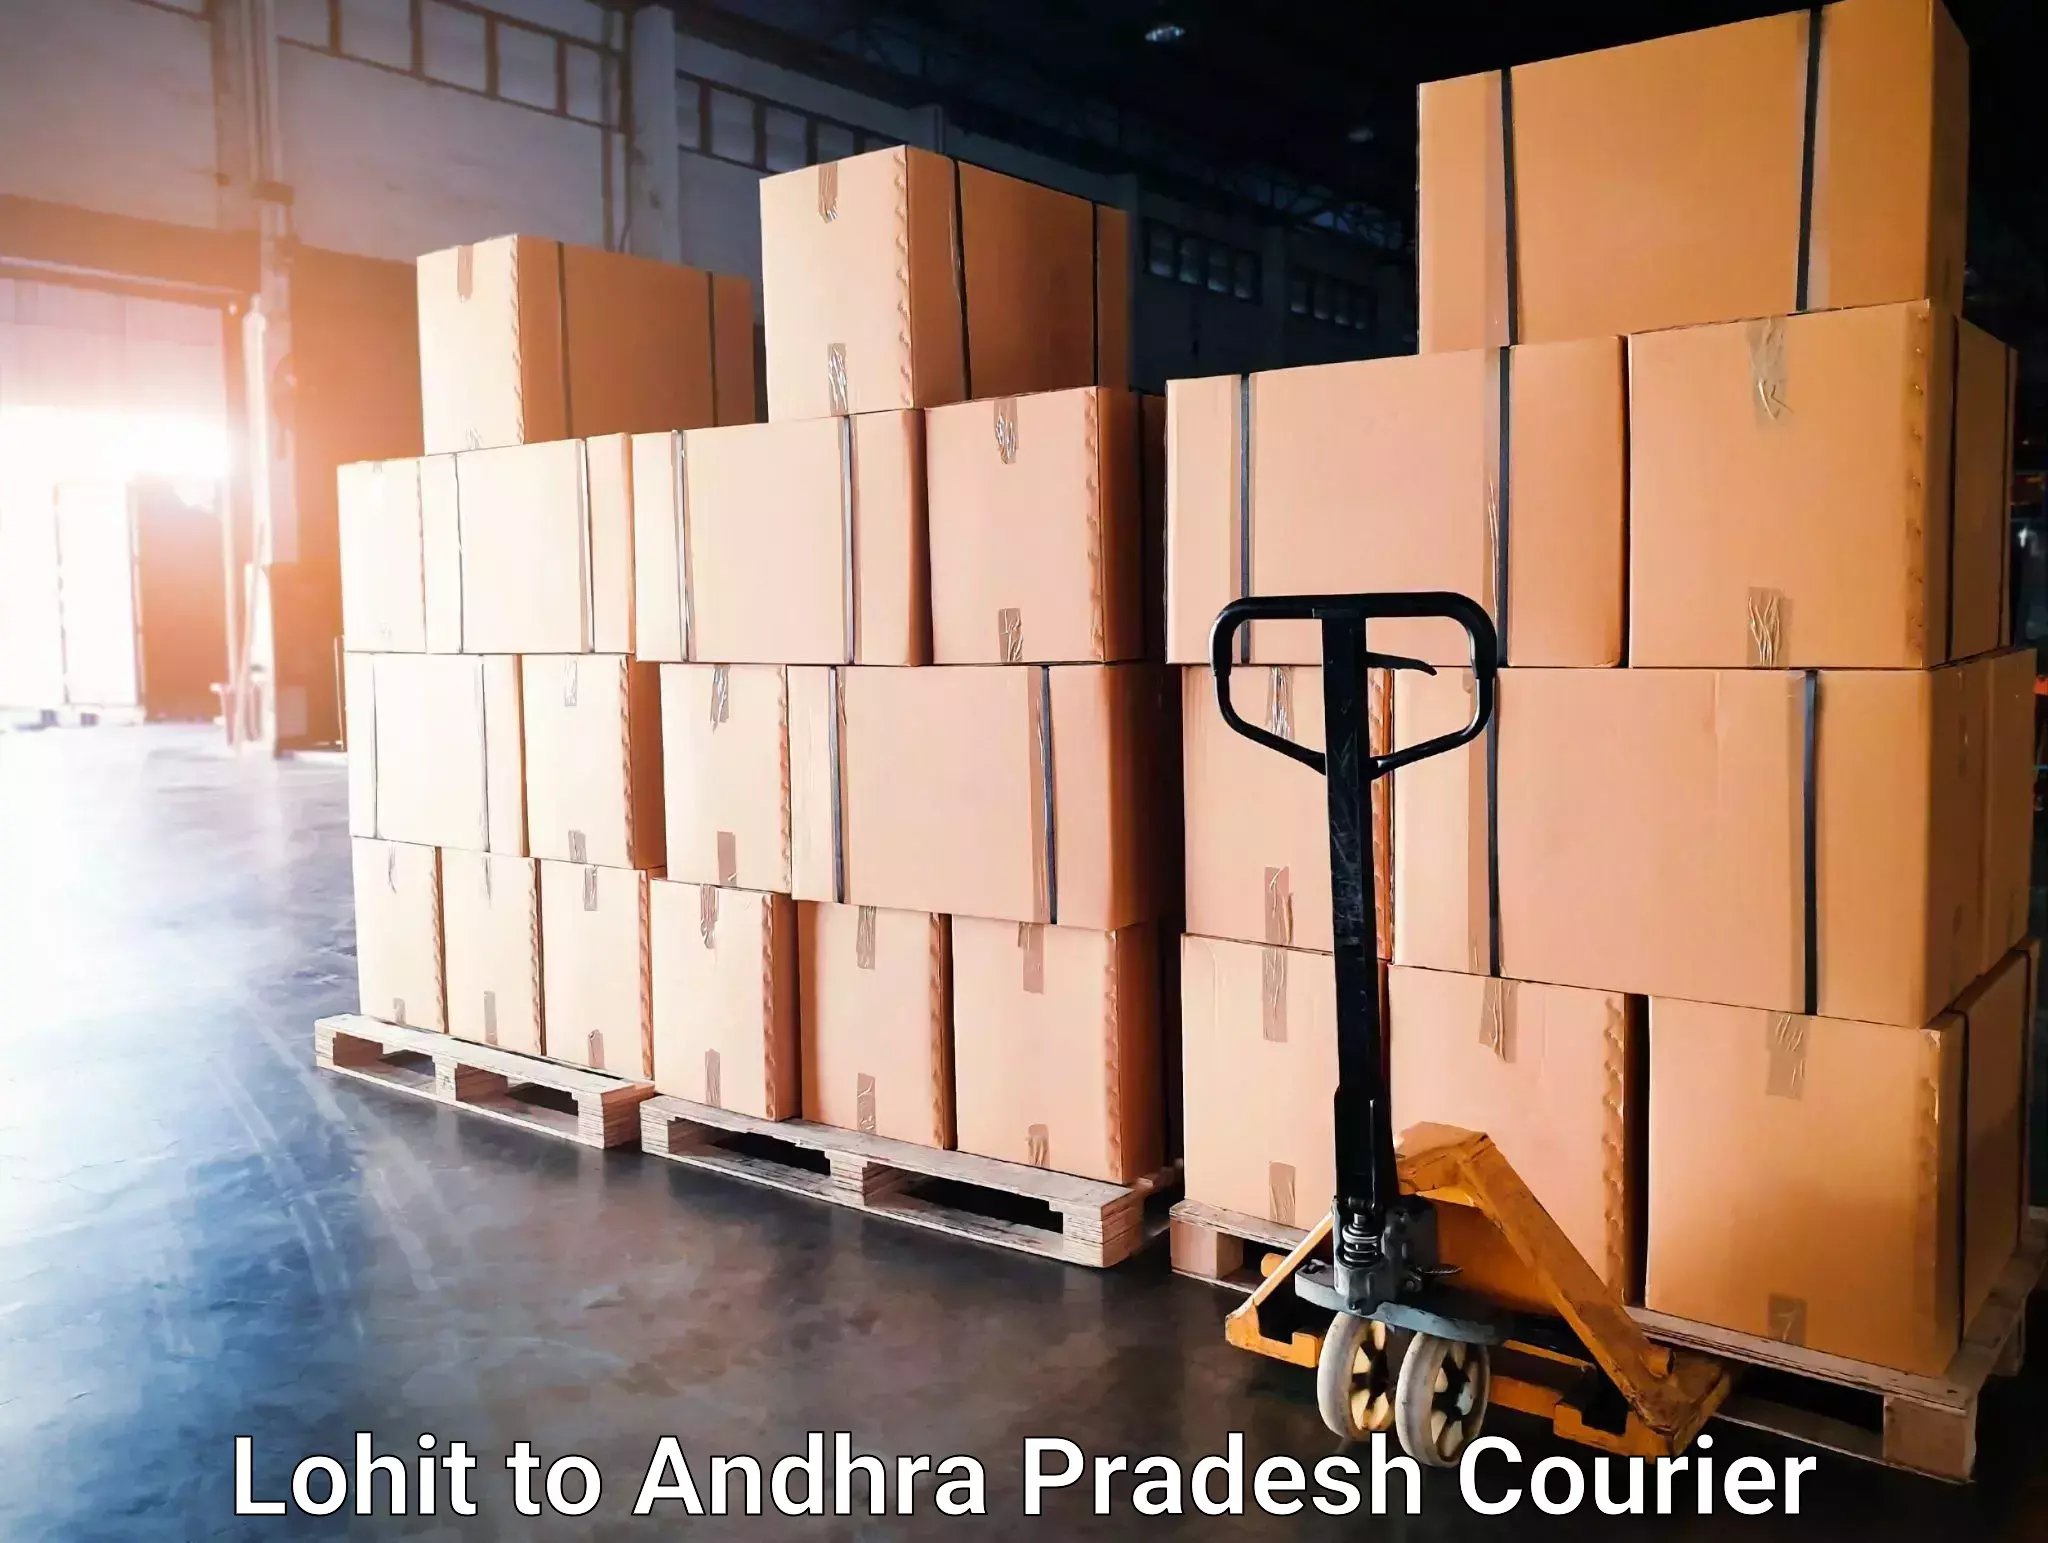 Express courier capabilities Lohit to Gudivada